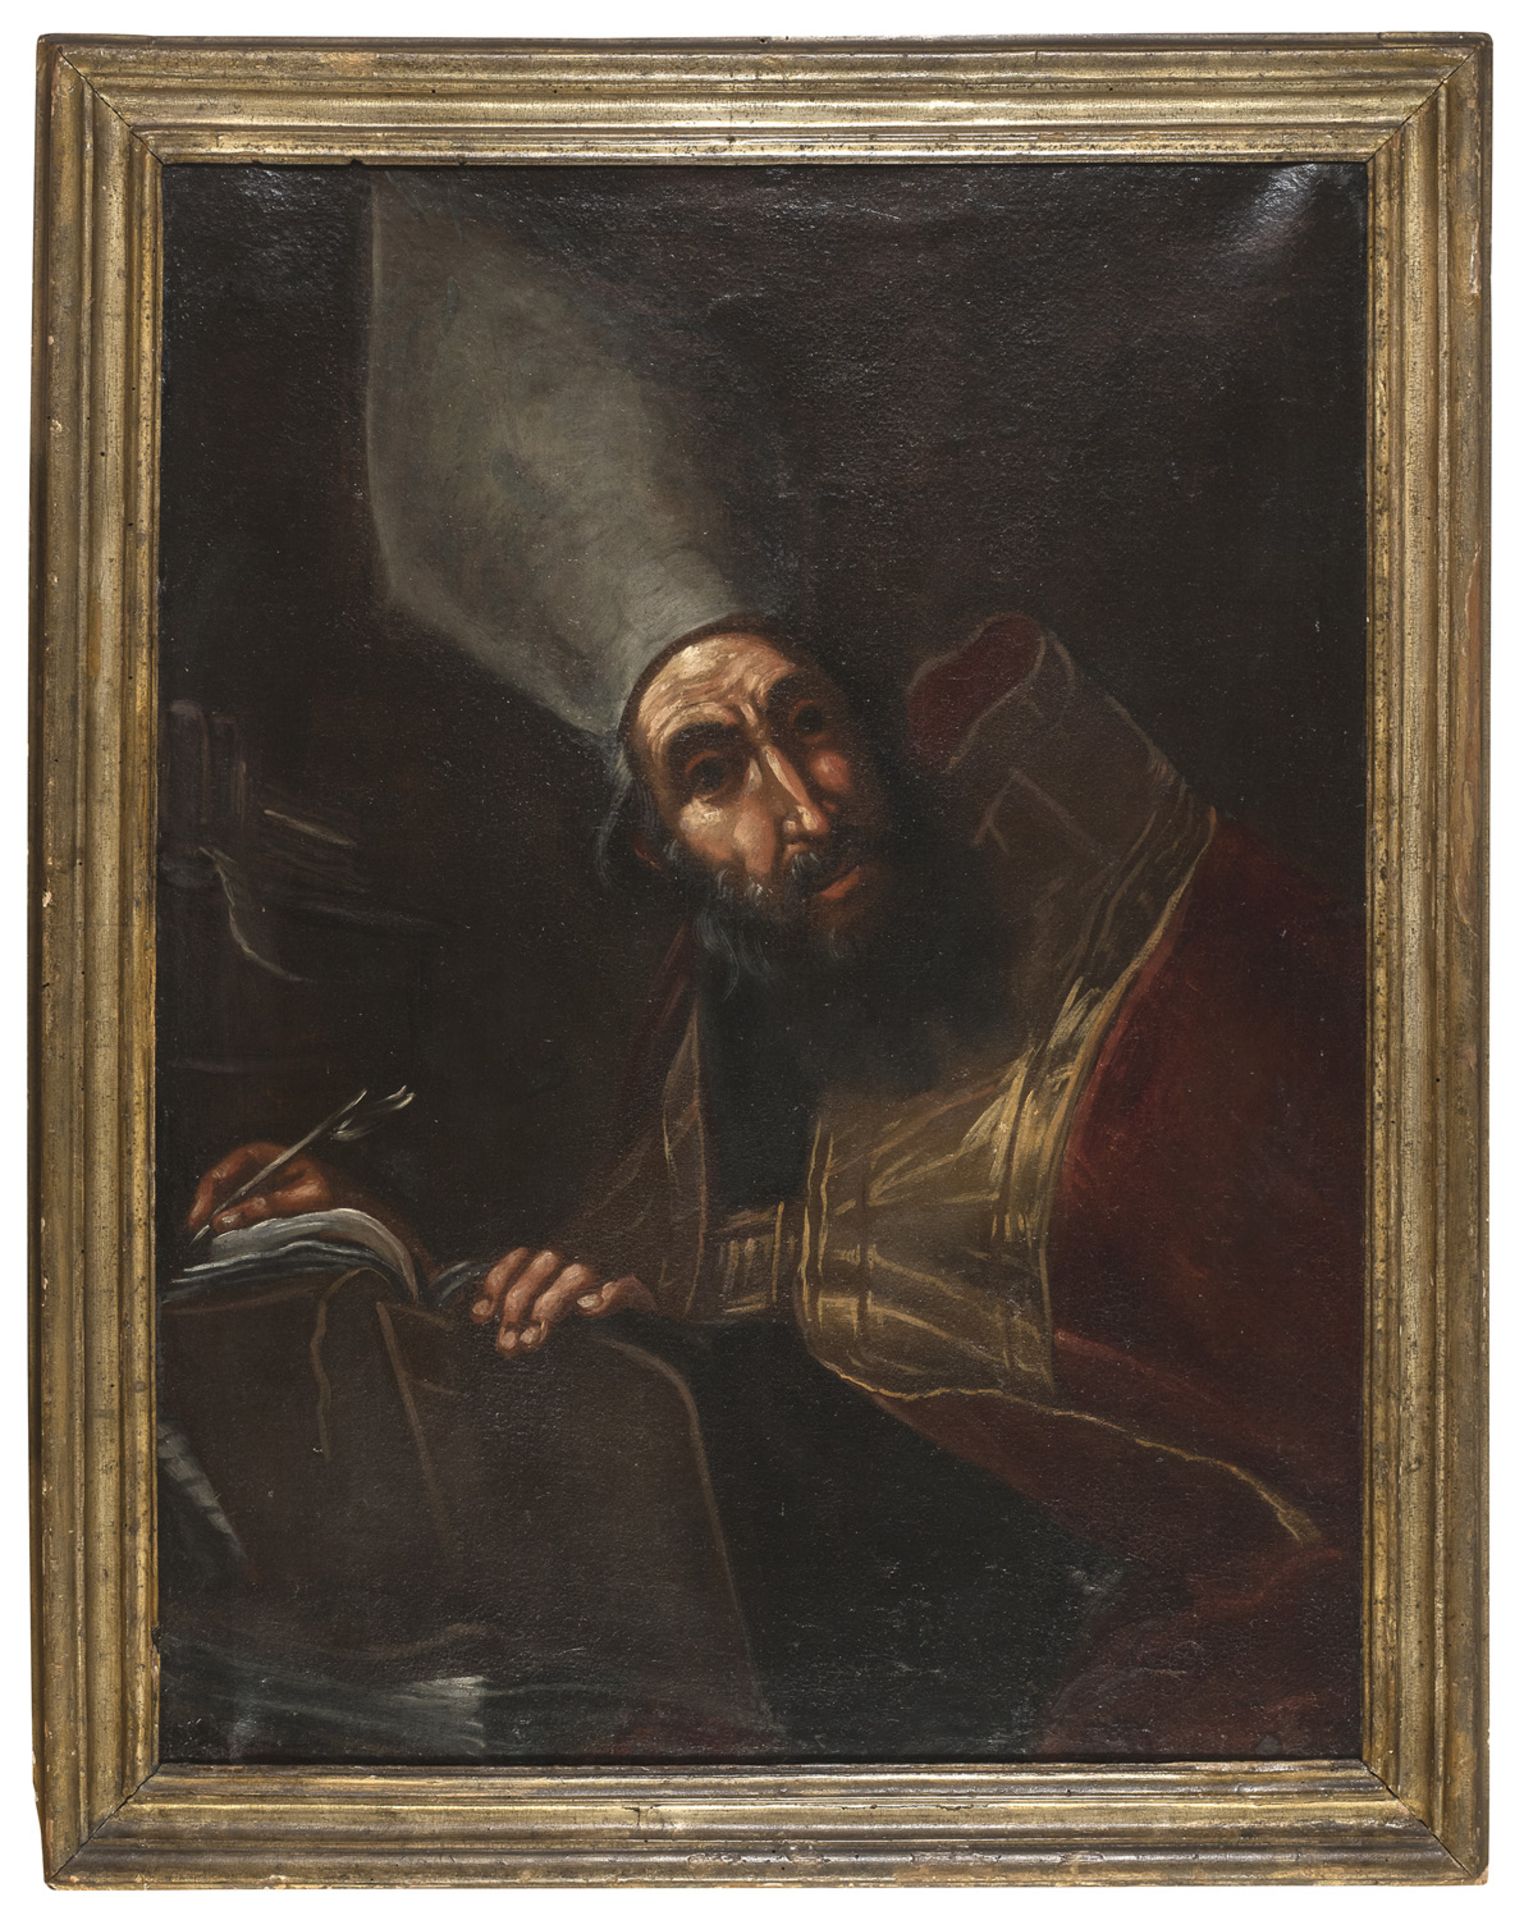 OIL PAINTING OF ST AMBROSE FROM THE CIRCLE OF MATTIA PRETI (1613-1699)